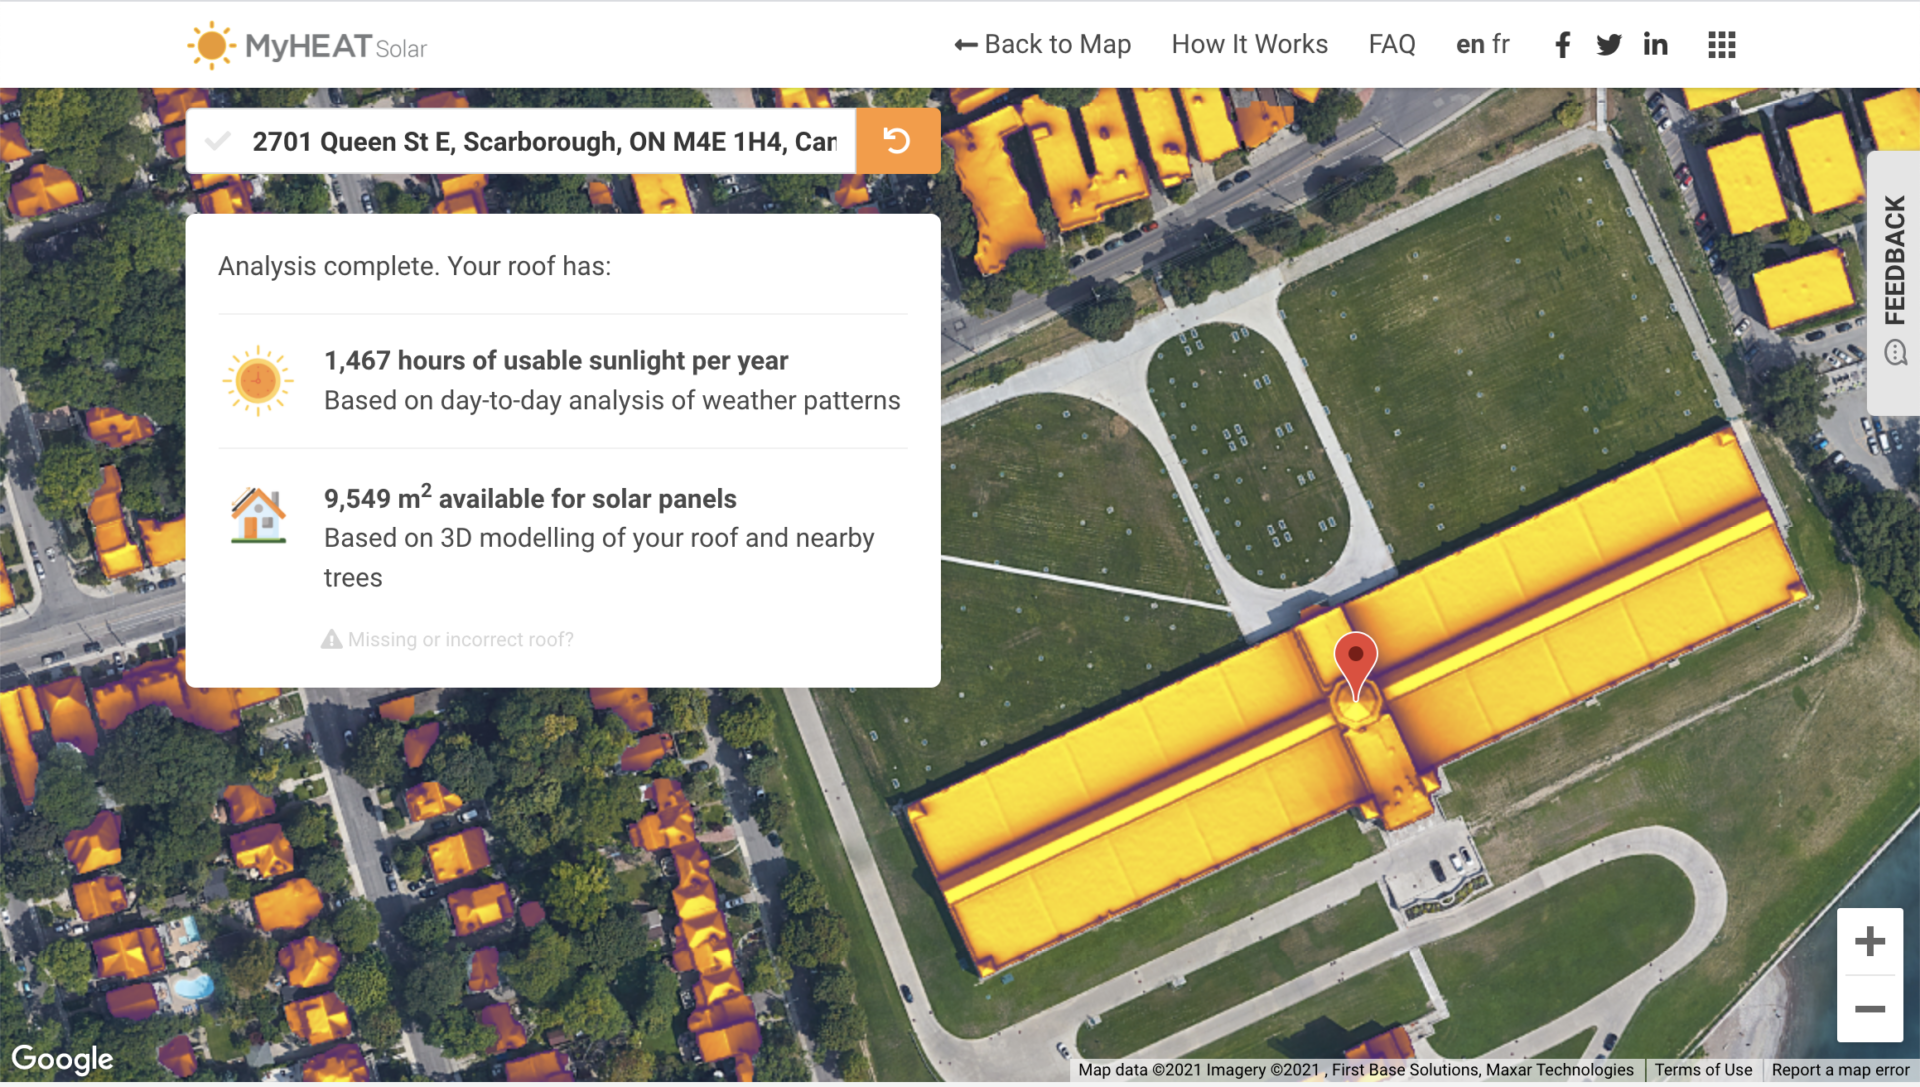 A solar map showing how much sun the roof of the R.C. Harris Water Treatment Plant building gets at 2701 Queen St. E, Scarborough, Ontario